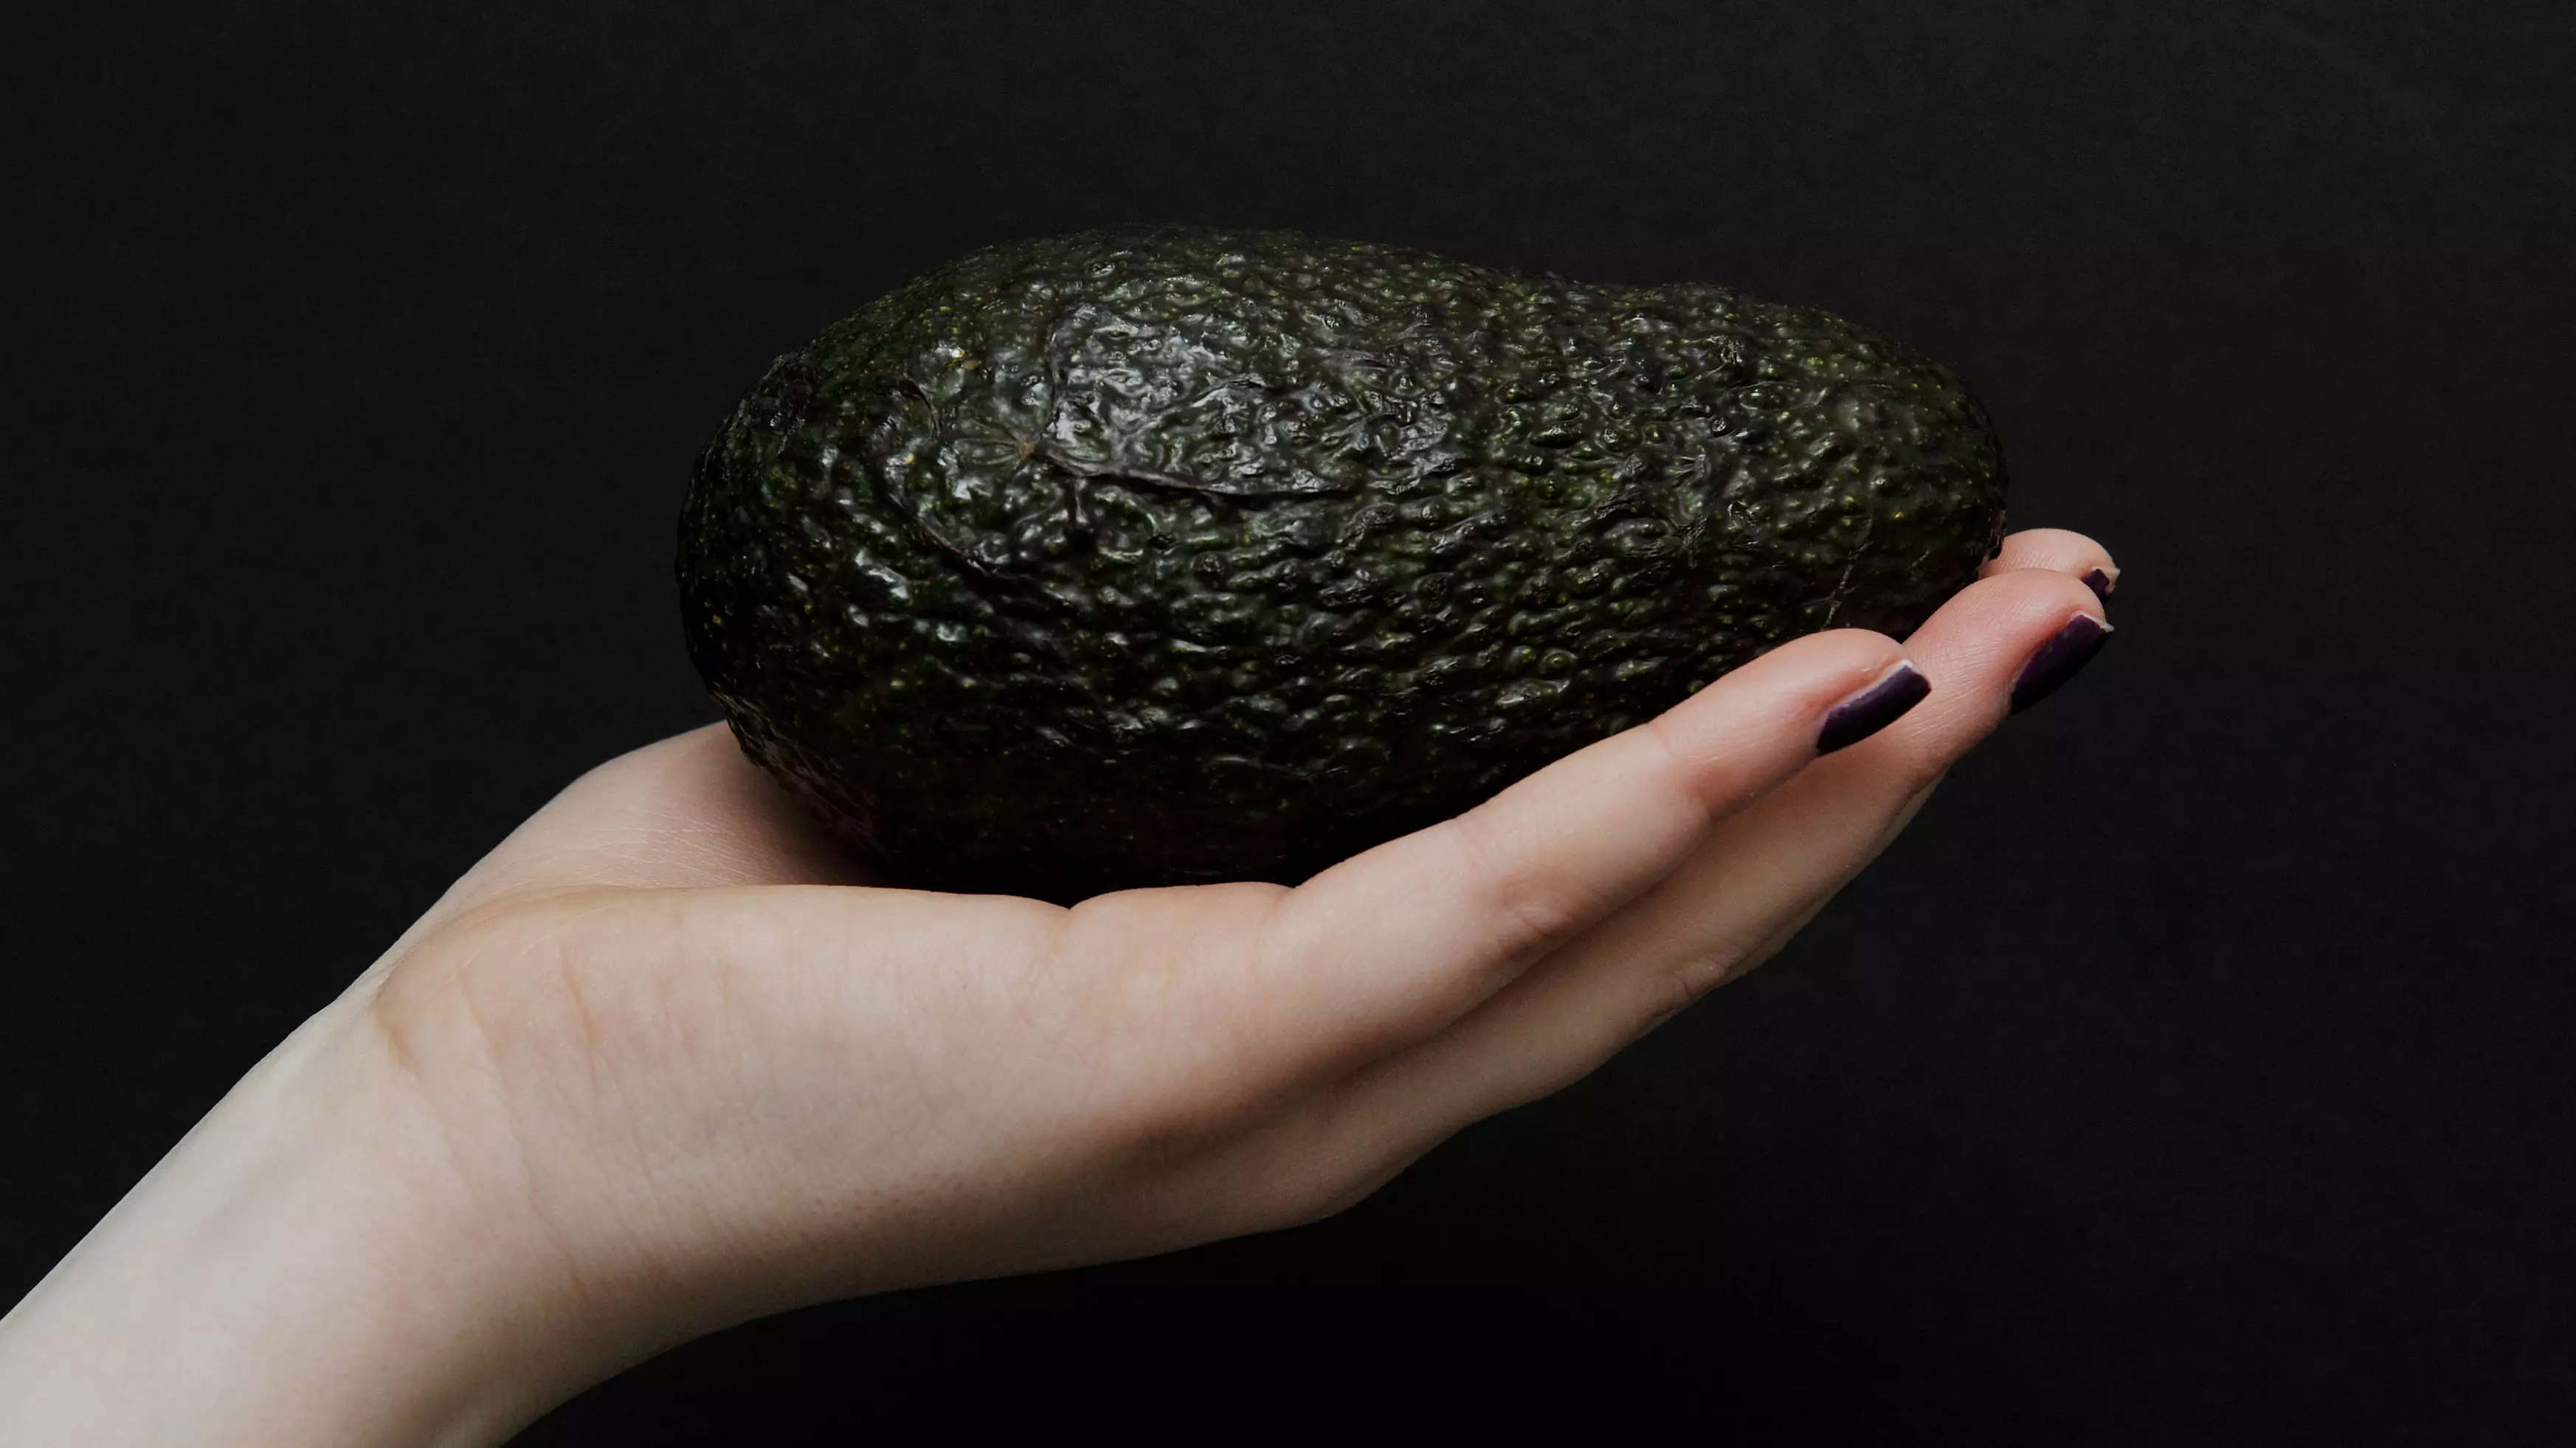 Developer Promises A Year’s Supply Of Avocado If You Buy An Apartment